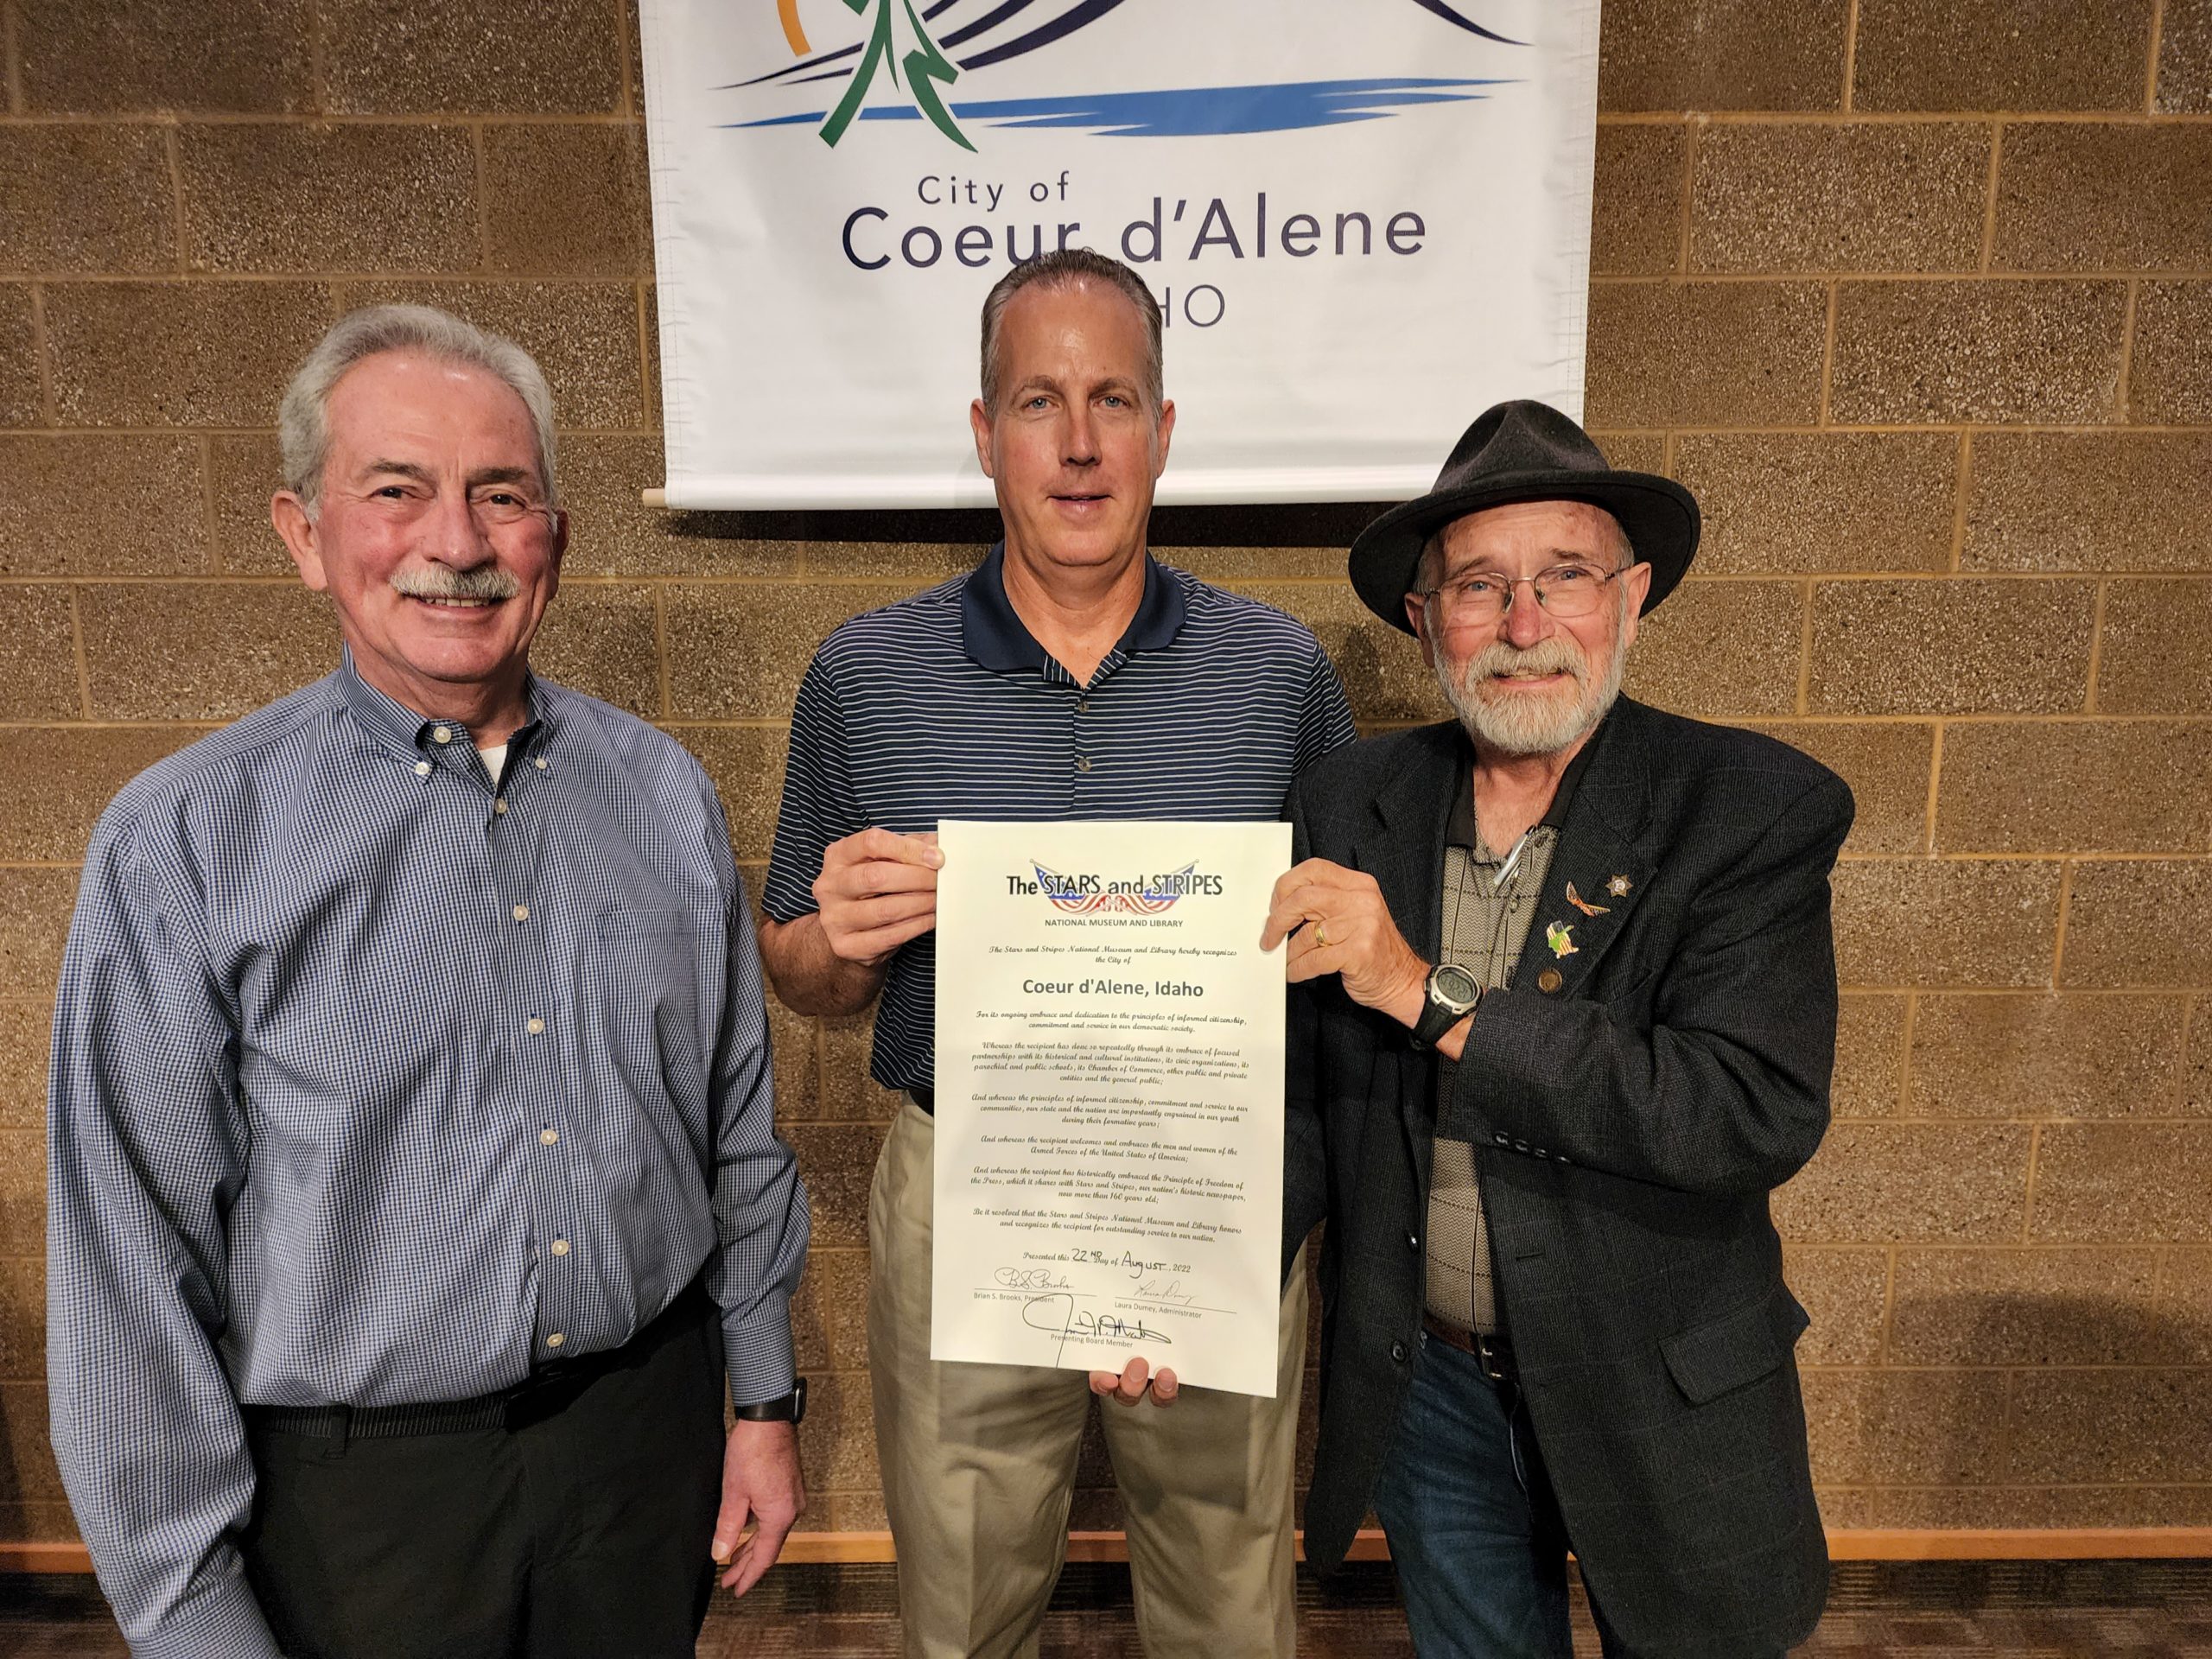 On Monday, August 22, 2022, Jim Martin presented the Stars and Stripes City Proclamation to Coeur d'Alene, Idaho which was accepted by Mayor Jim Hammond and City Administrator Troy Tymeson.